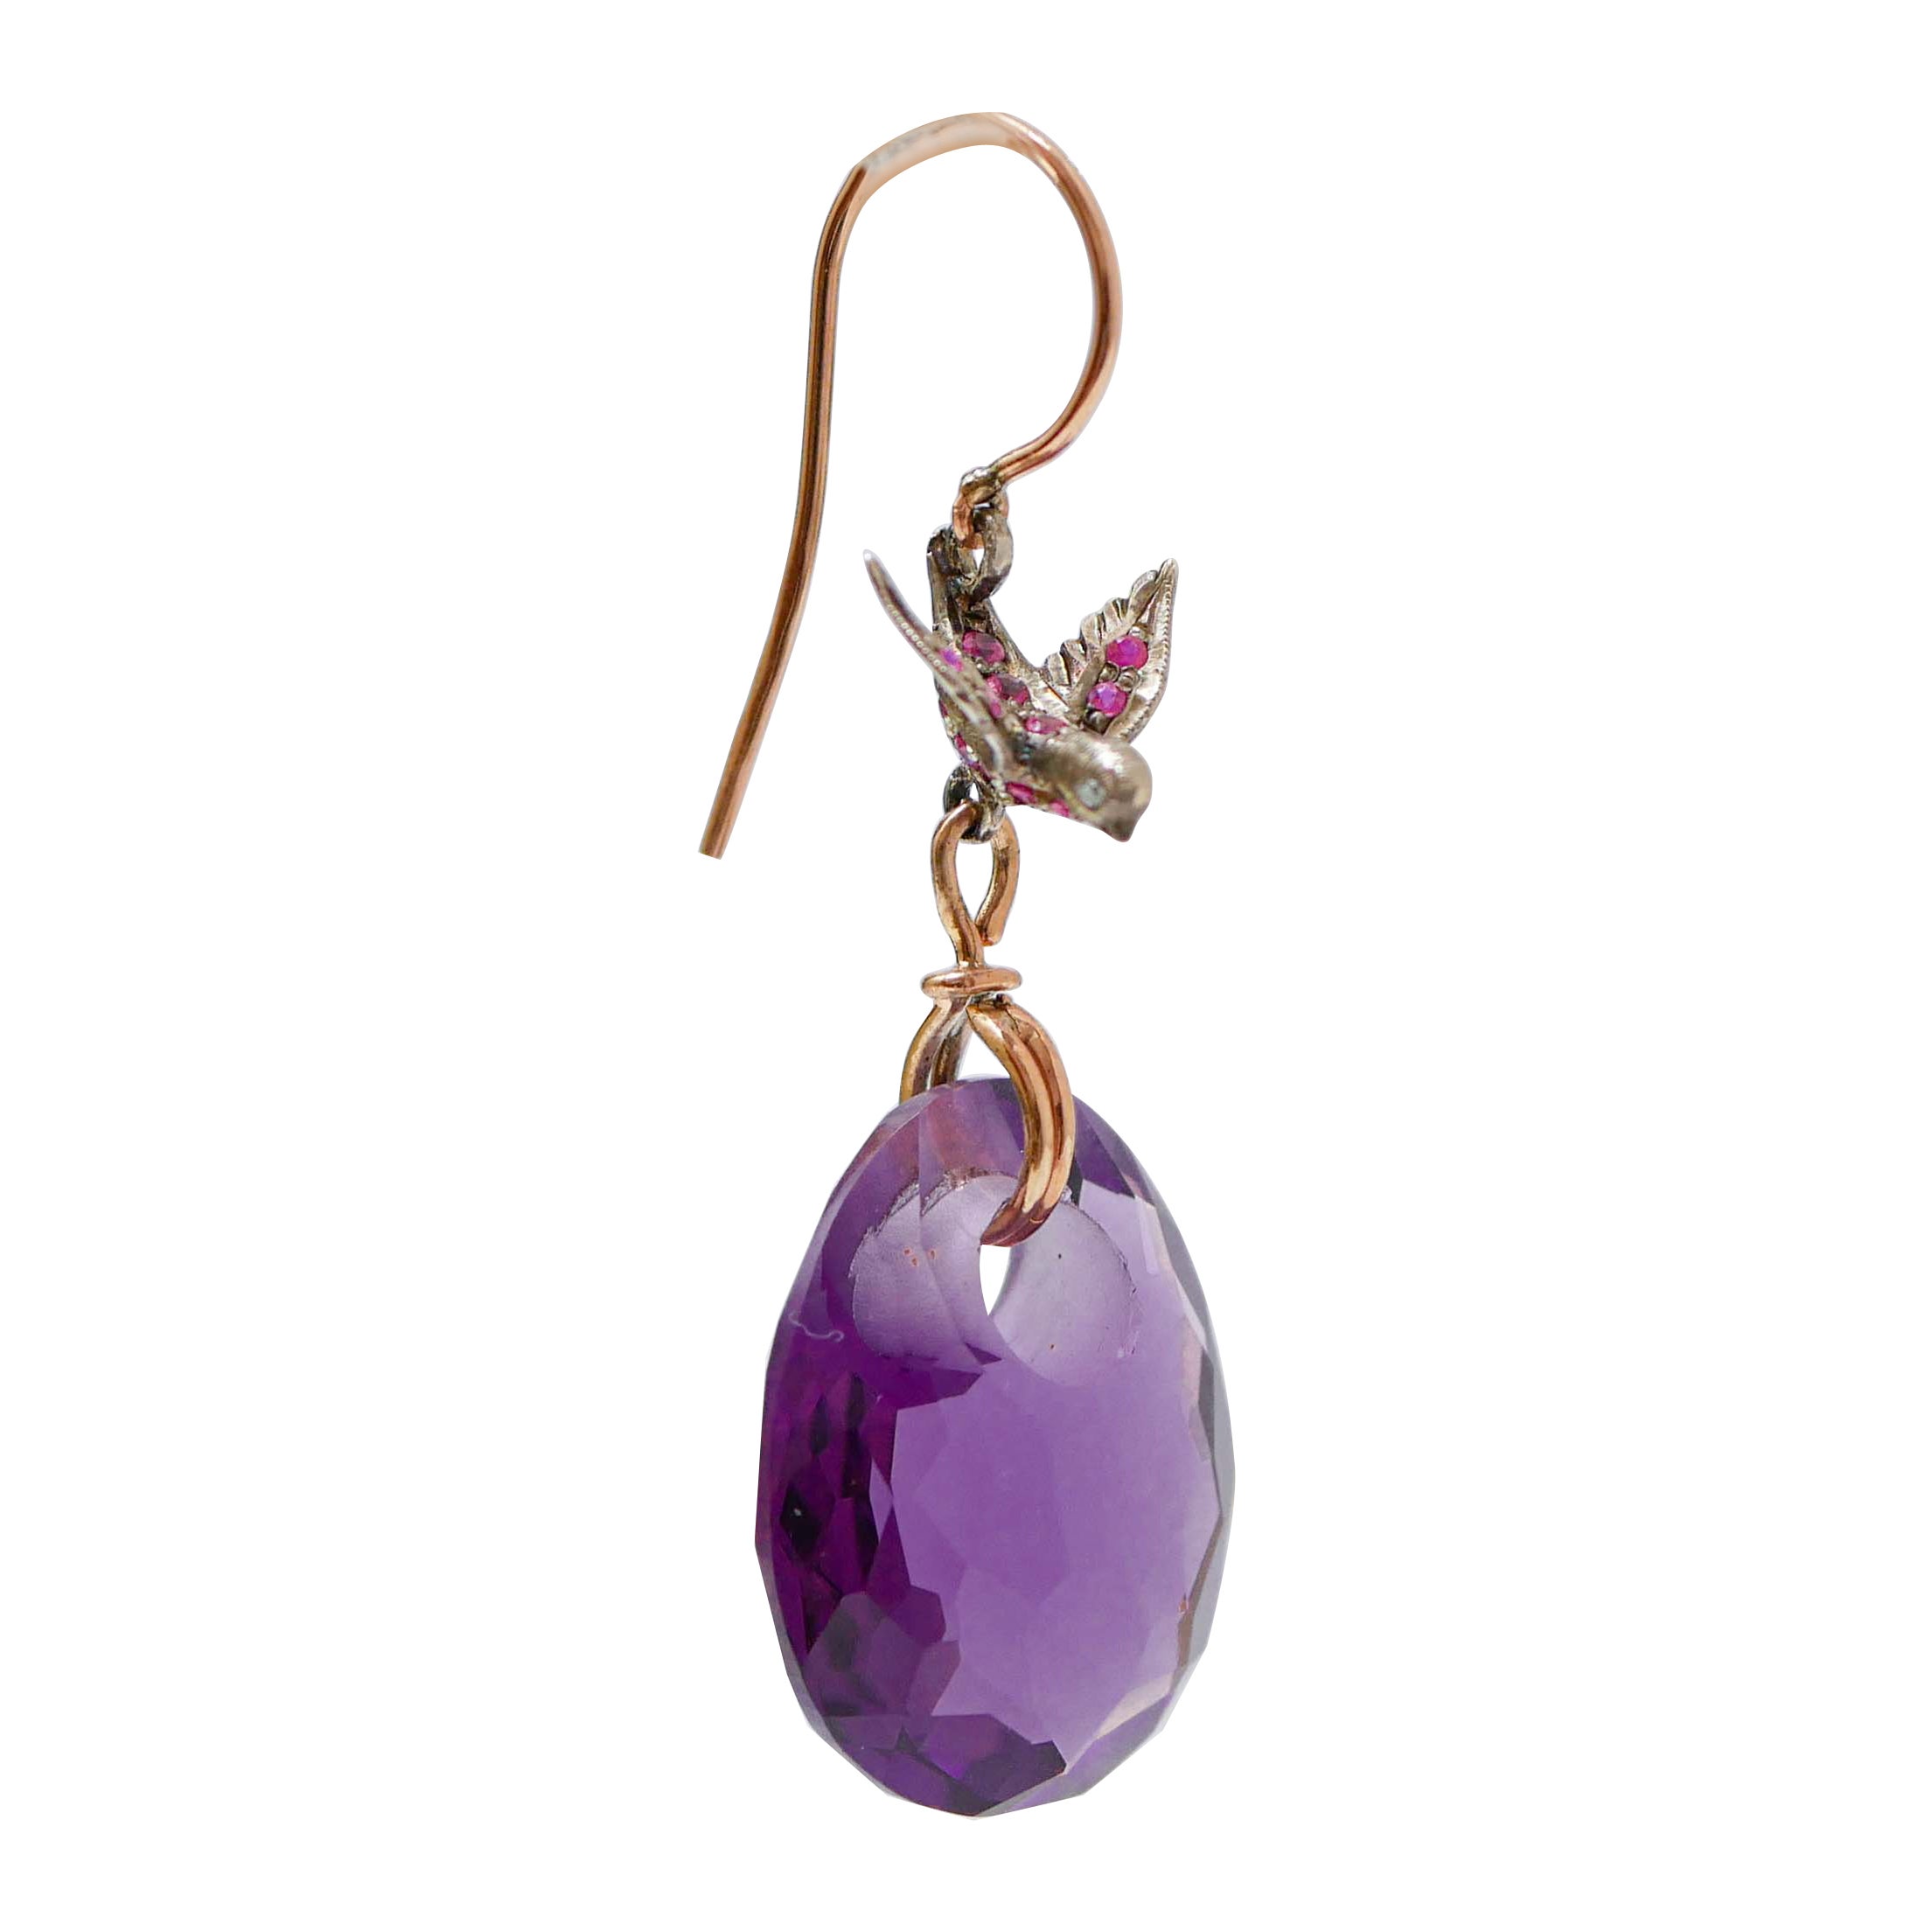 Amethysts, Rubies, Diamonds, Rose Gold and Silver Dangle Earrings.